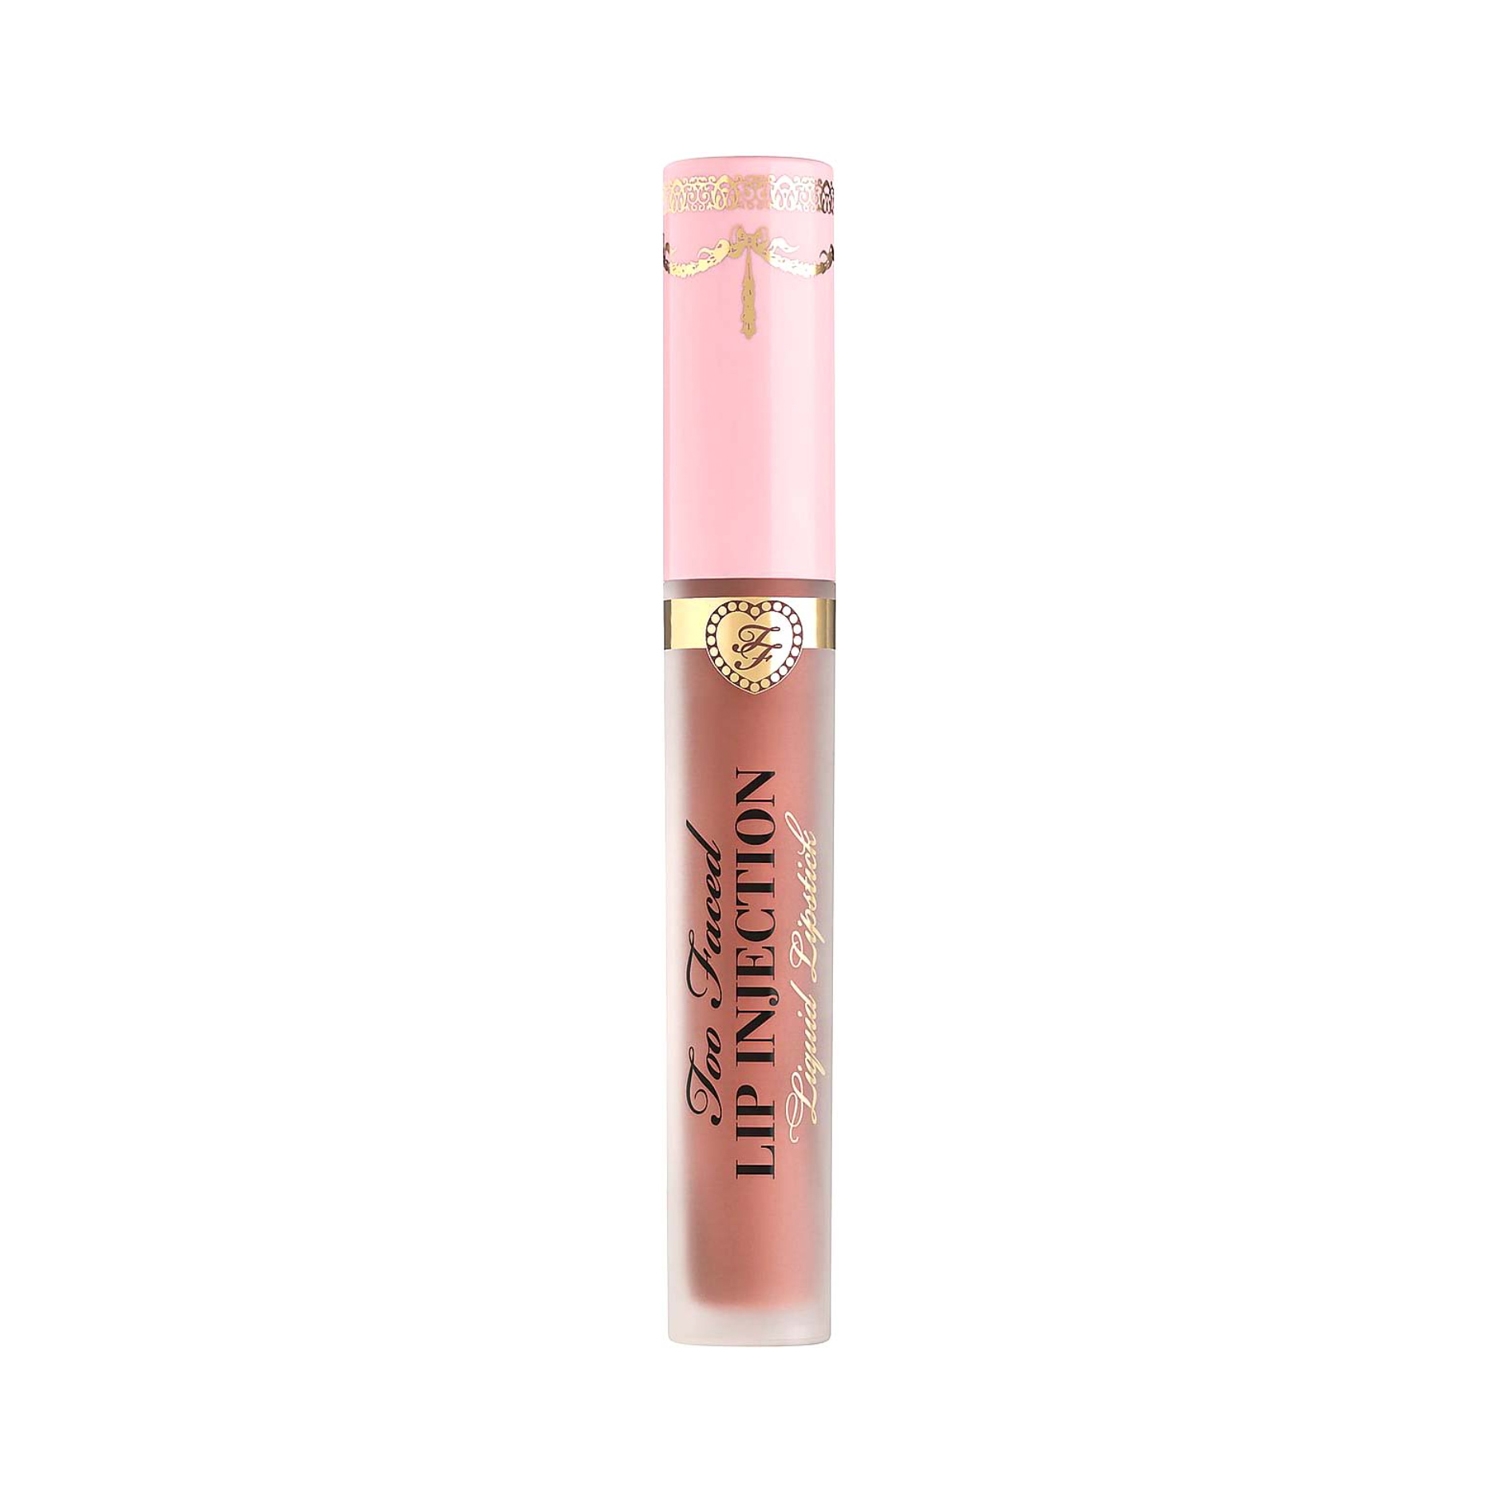 Too Faced | Too Faced Lip Injection Liquid Lipstick - Give ‘Em Lip (3ml)